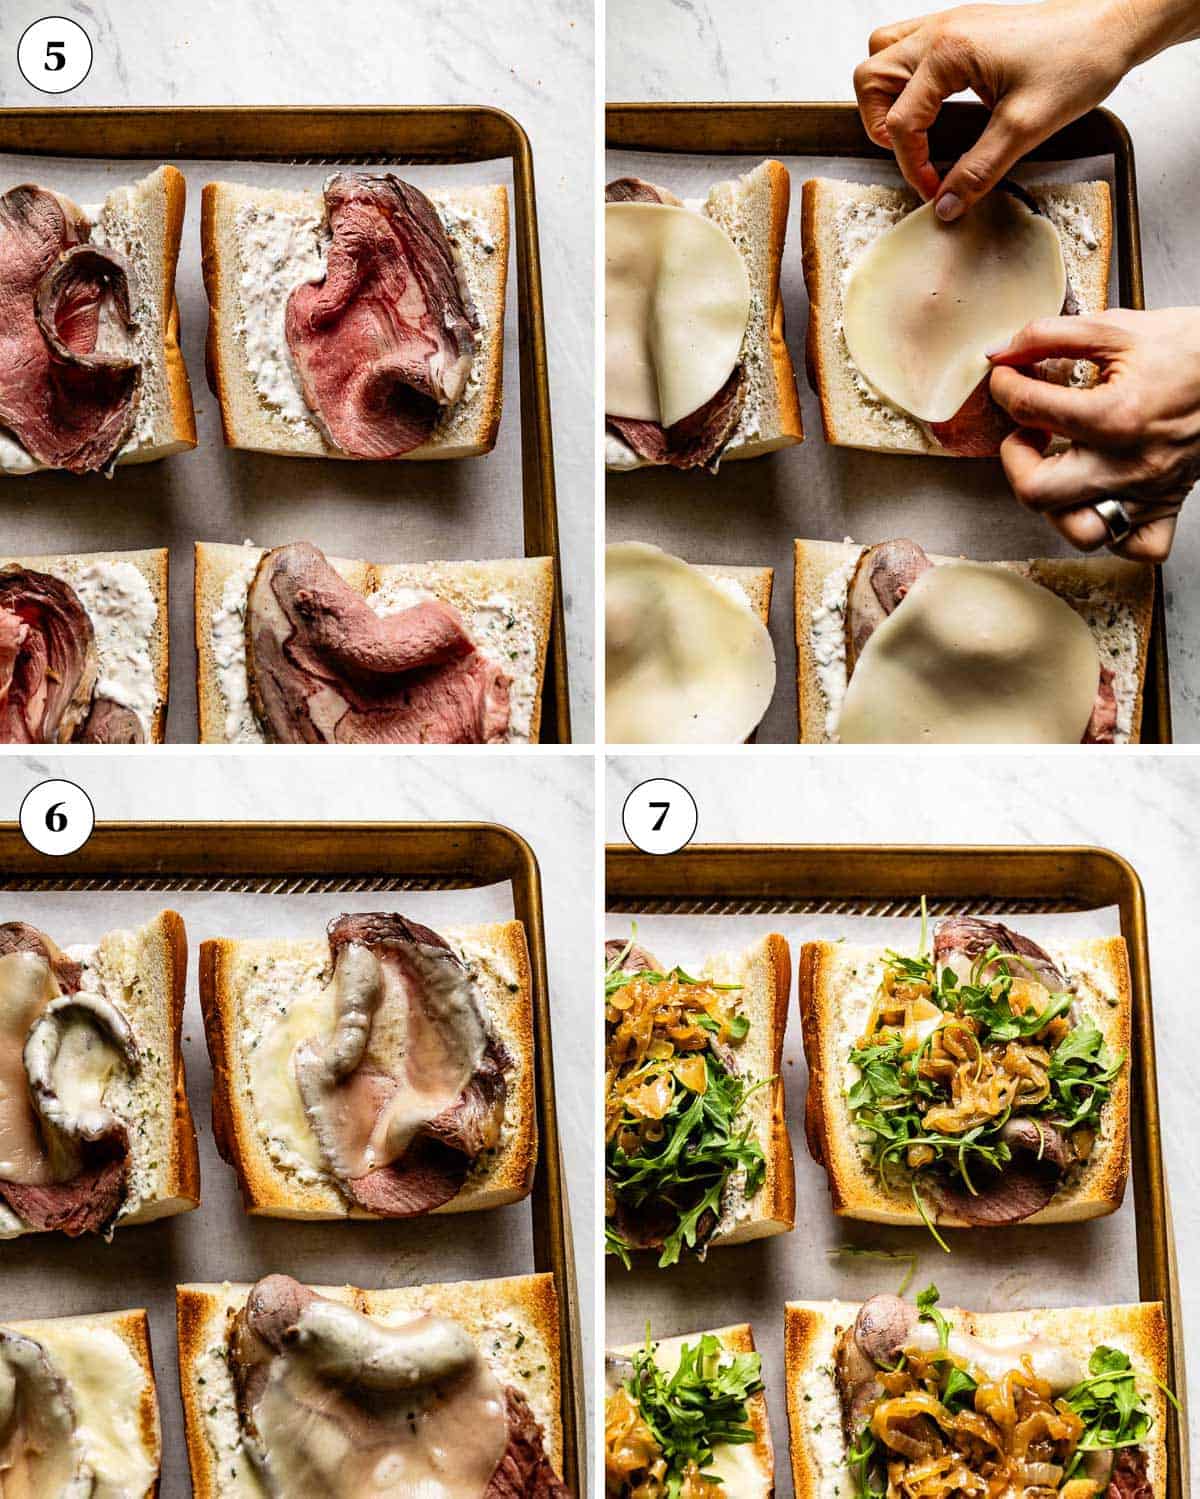 Photos showing how to assemble Prime rib sandwiches.